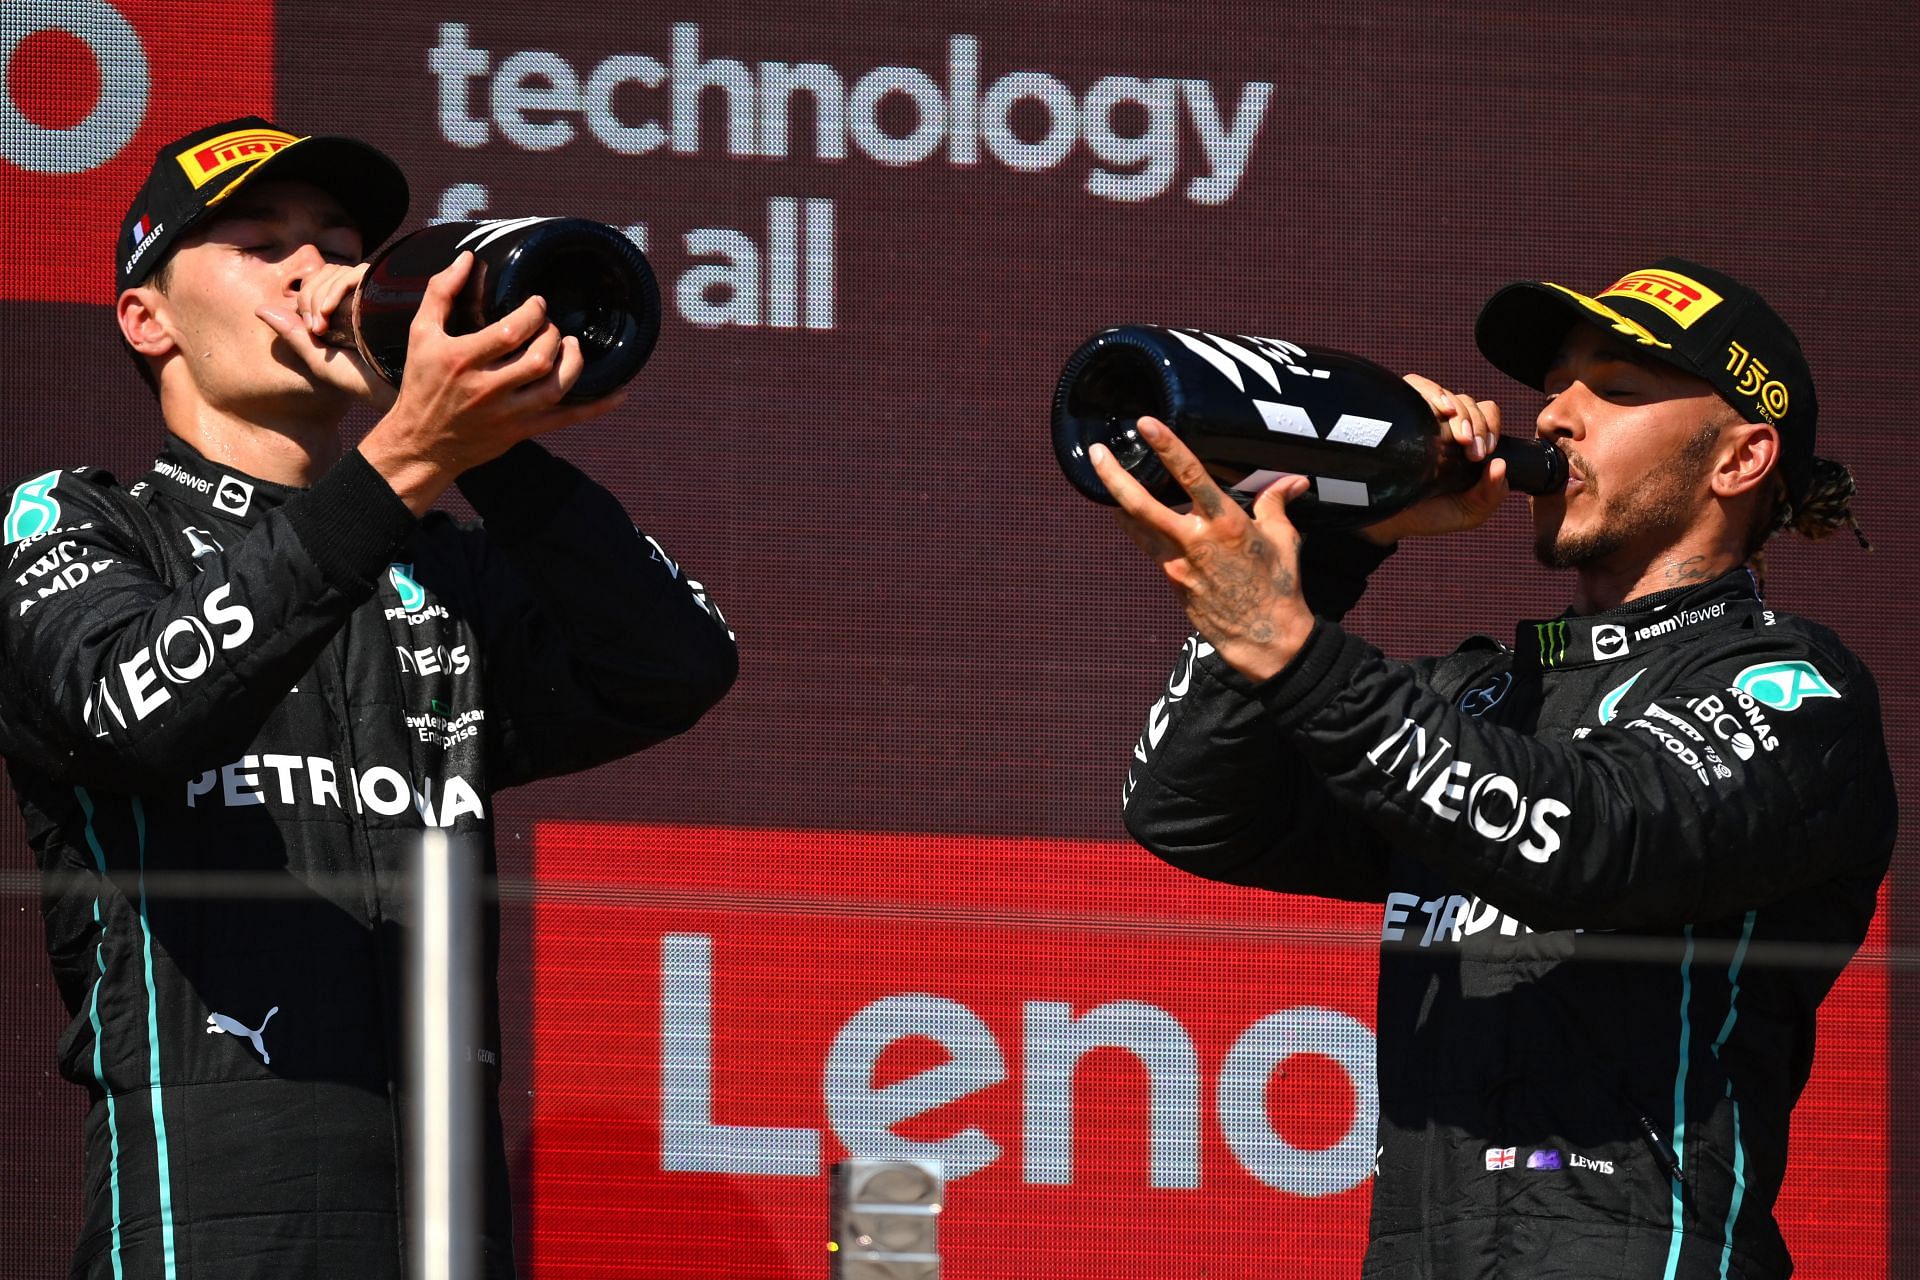 Mercedes drivers George Russell (left) and Lewis Hamilton (right) celebrate after scoring a double podium at the 2022 F1 French GP (Photo by Dan Mullan/Getty Images)